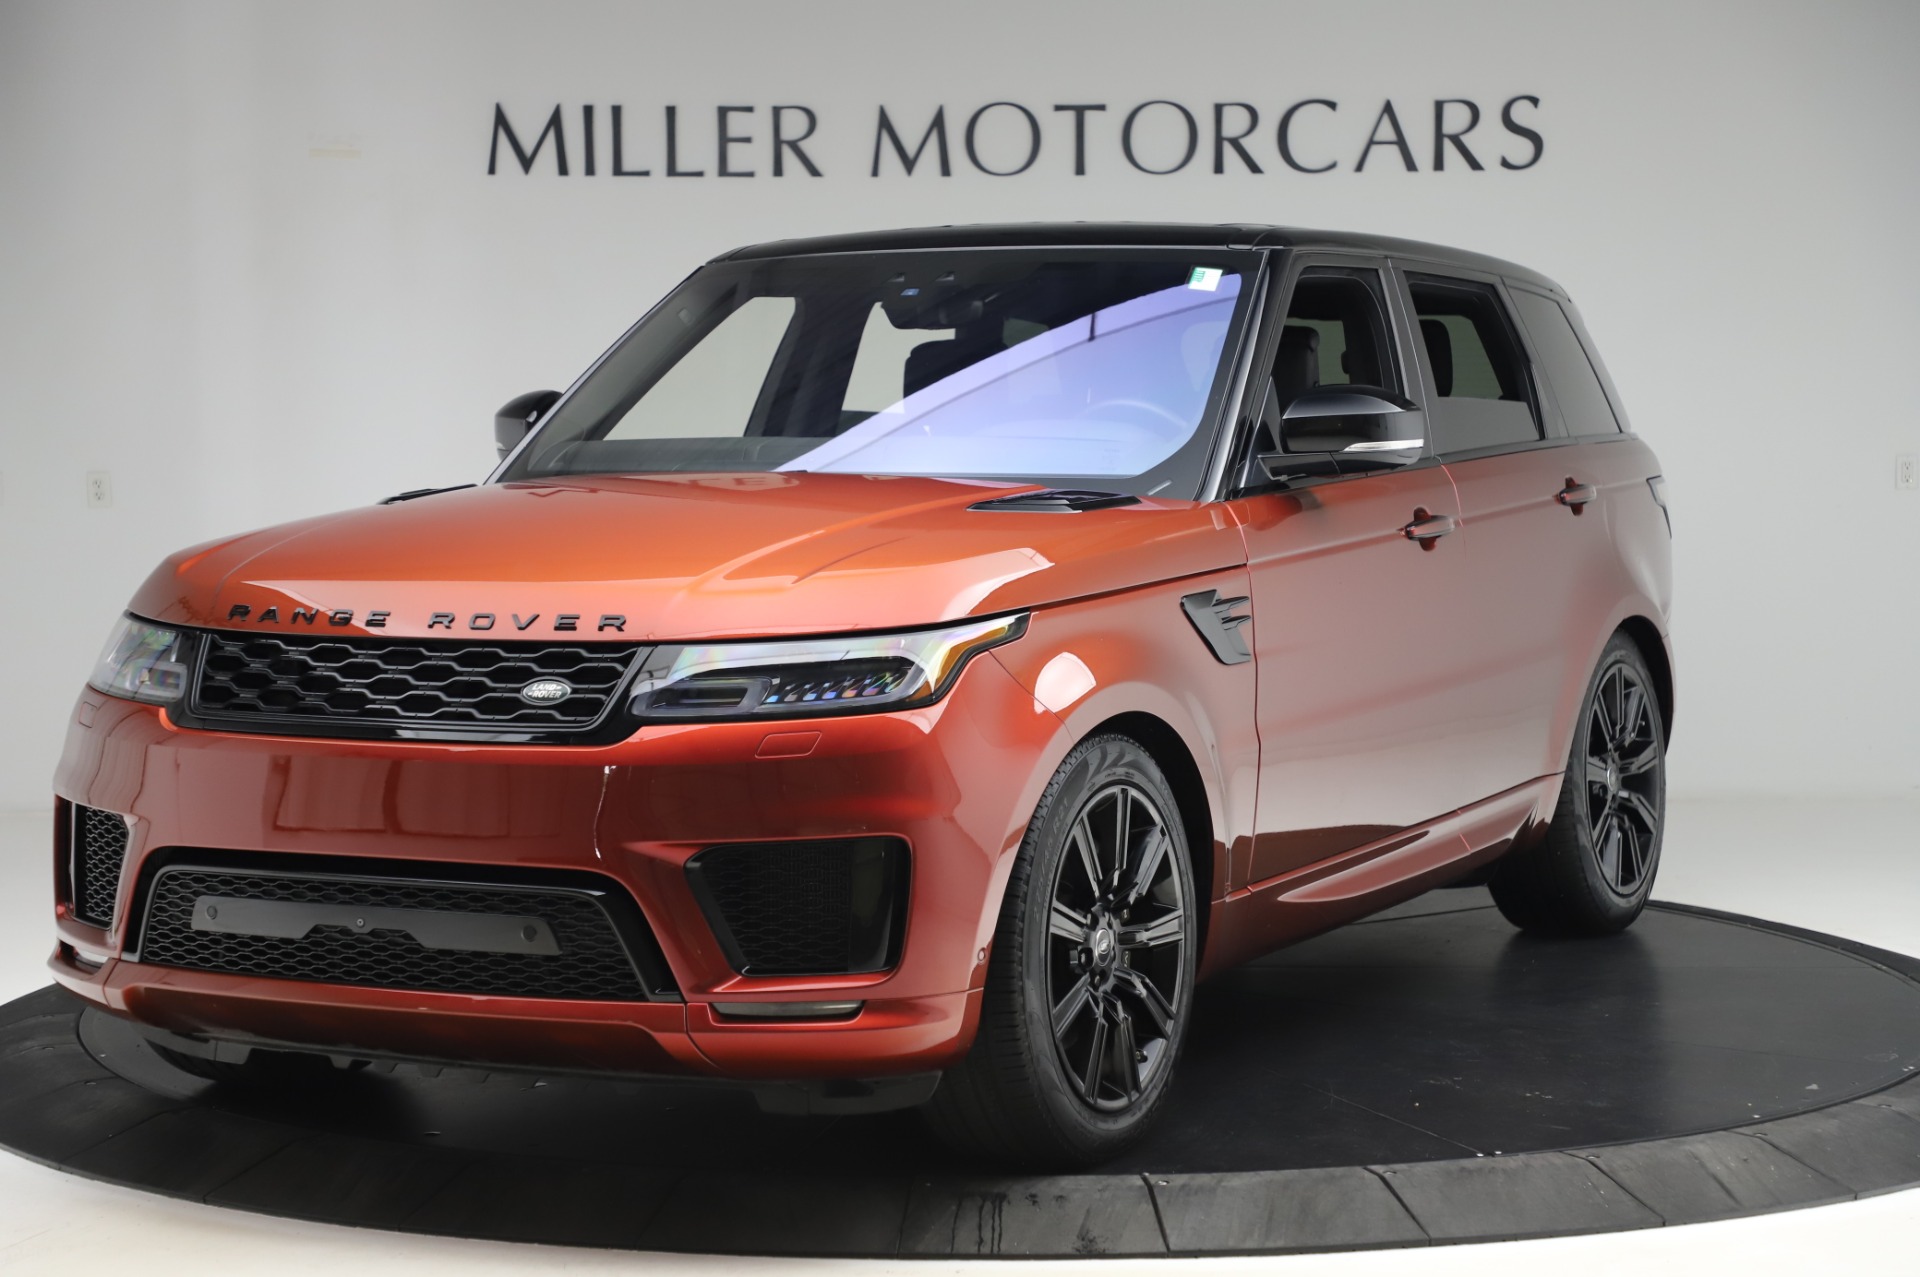 Used 2019 Land Rover Range Rover Sport Autobiography for sale Sold at Alfa Romeo of Westport in Westport CT 06880 1